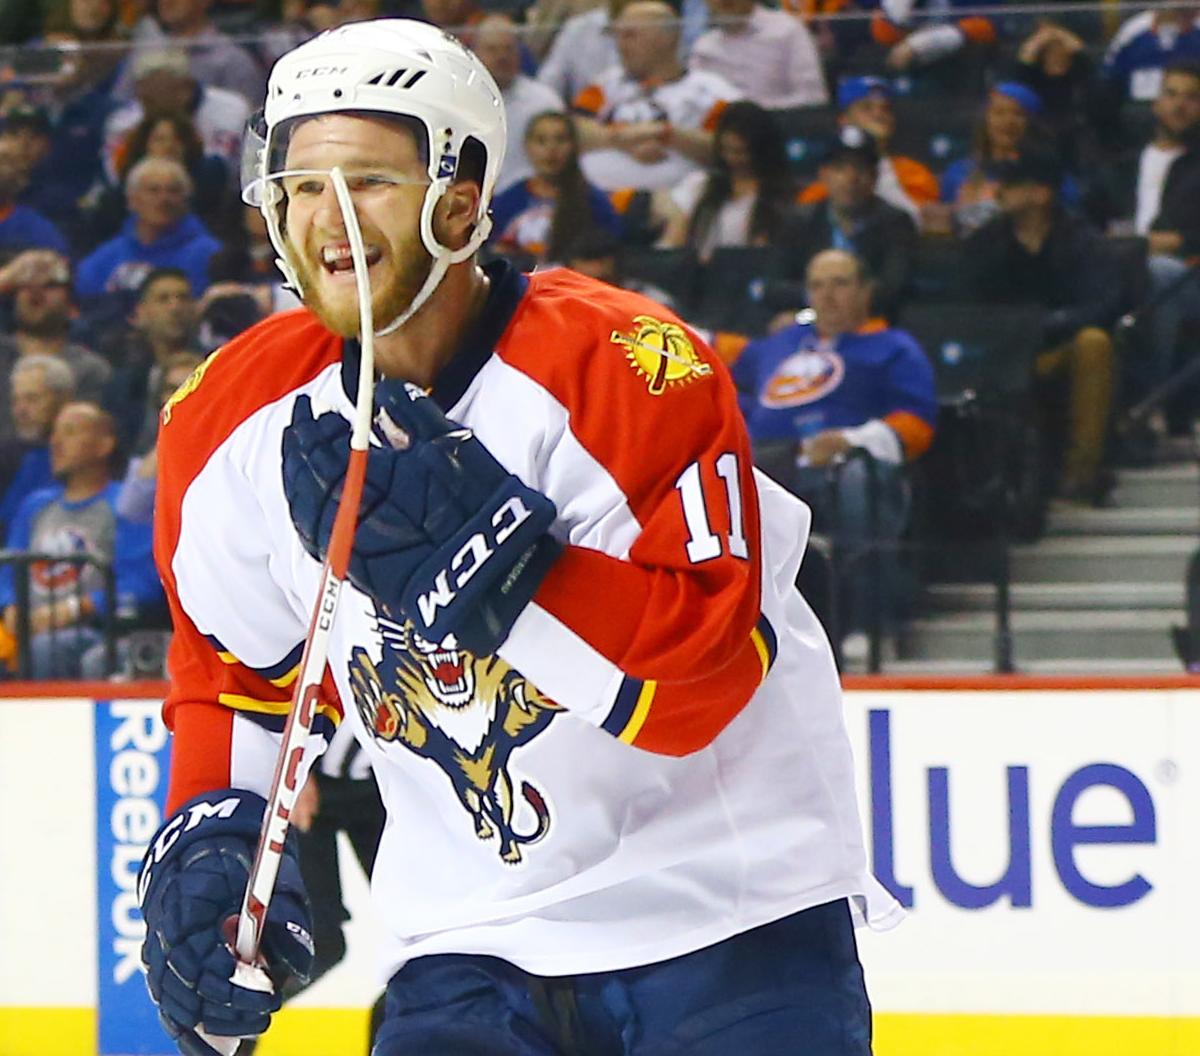 Some appreciation for Panthers' All-Star Huberdeau - NBC Sports